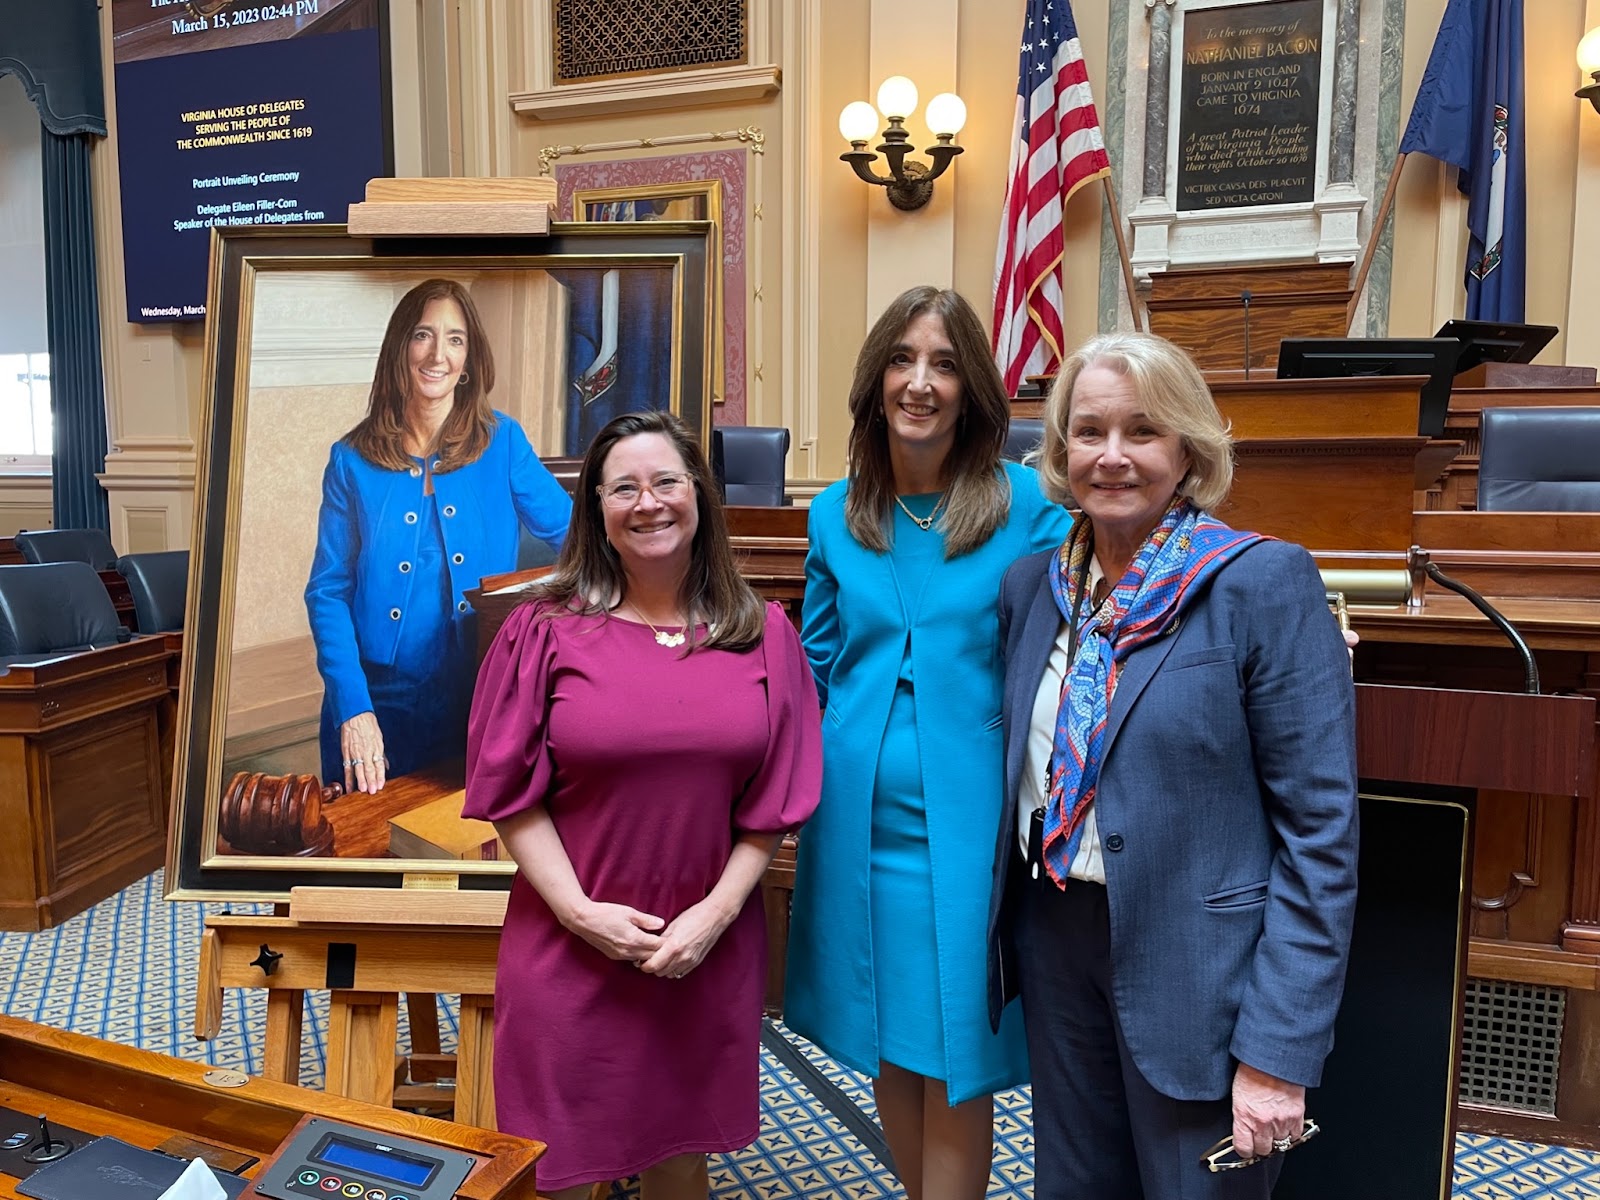 Pictured with Delegate Shelly Simonds (left) and Delegate Eileen Filler-Corn (center) at the portrait unveiling ceremony.